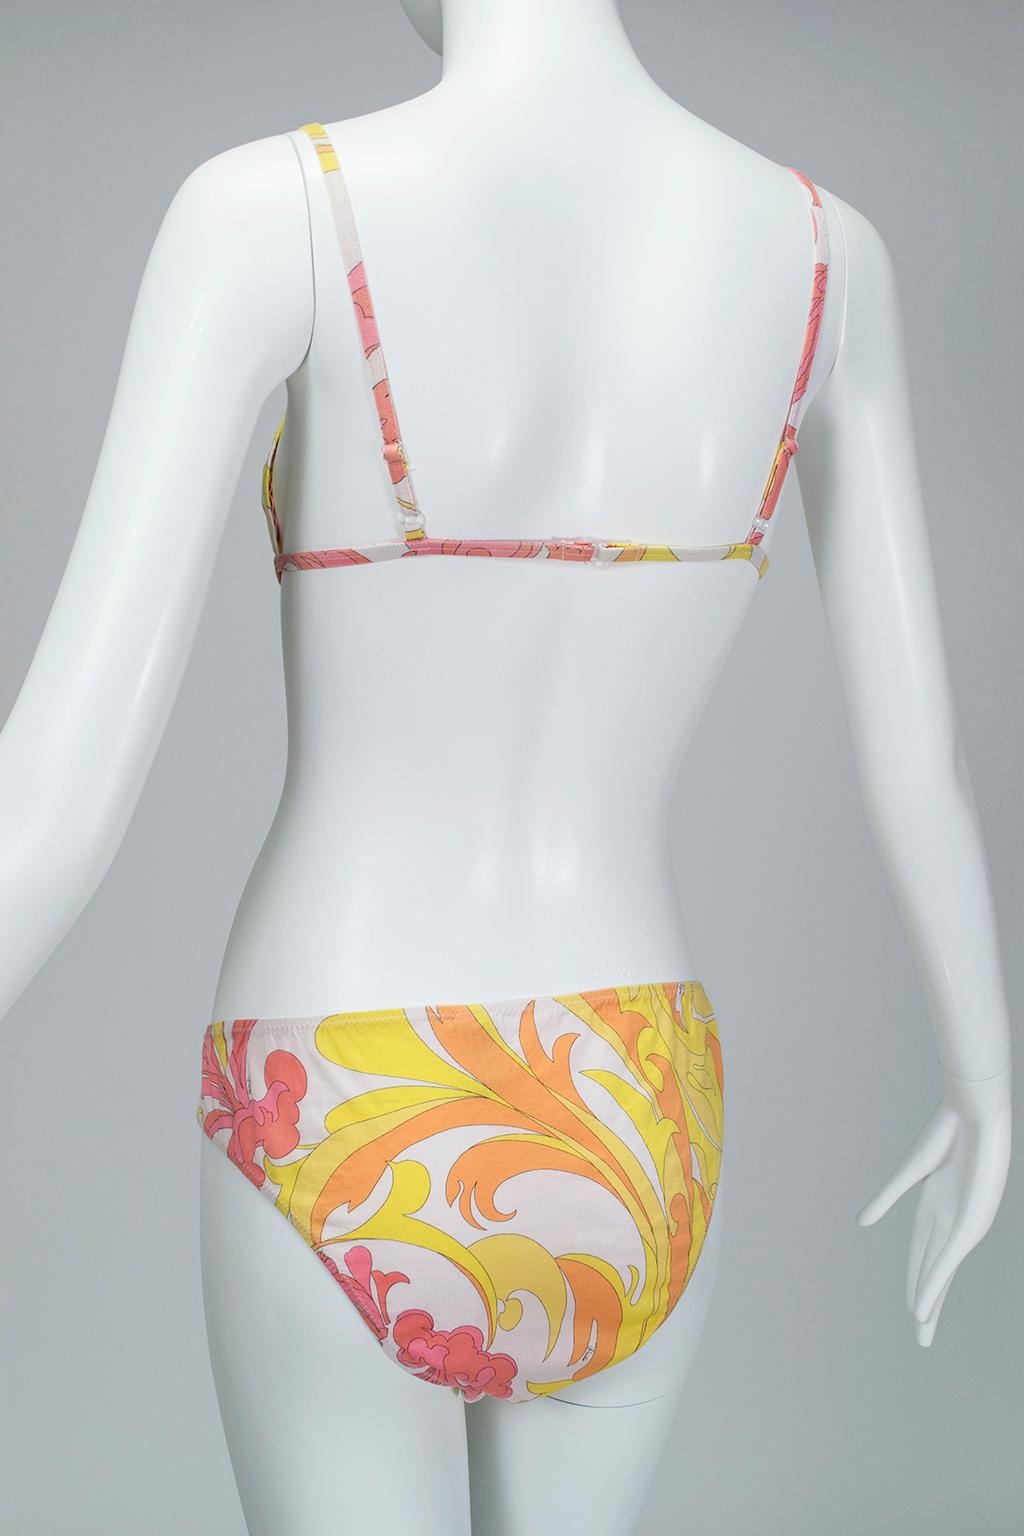 Beige Emilio Pucci Pink Yellow Psychedelic Lounge Bra and Panty Set- S-M, 21st Century For Sale